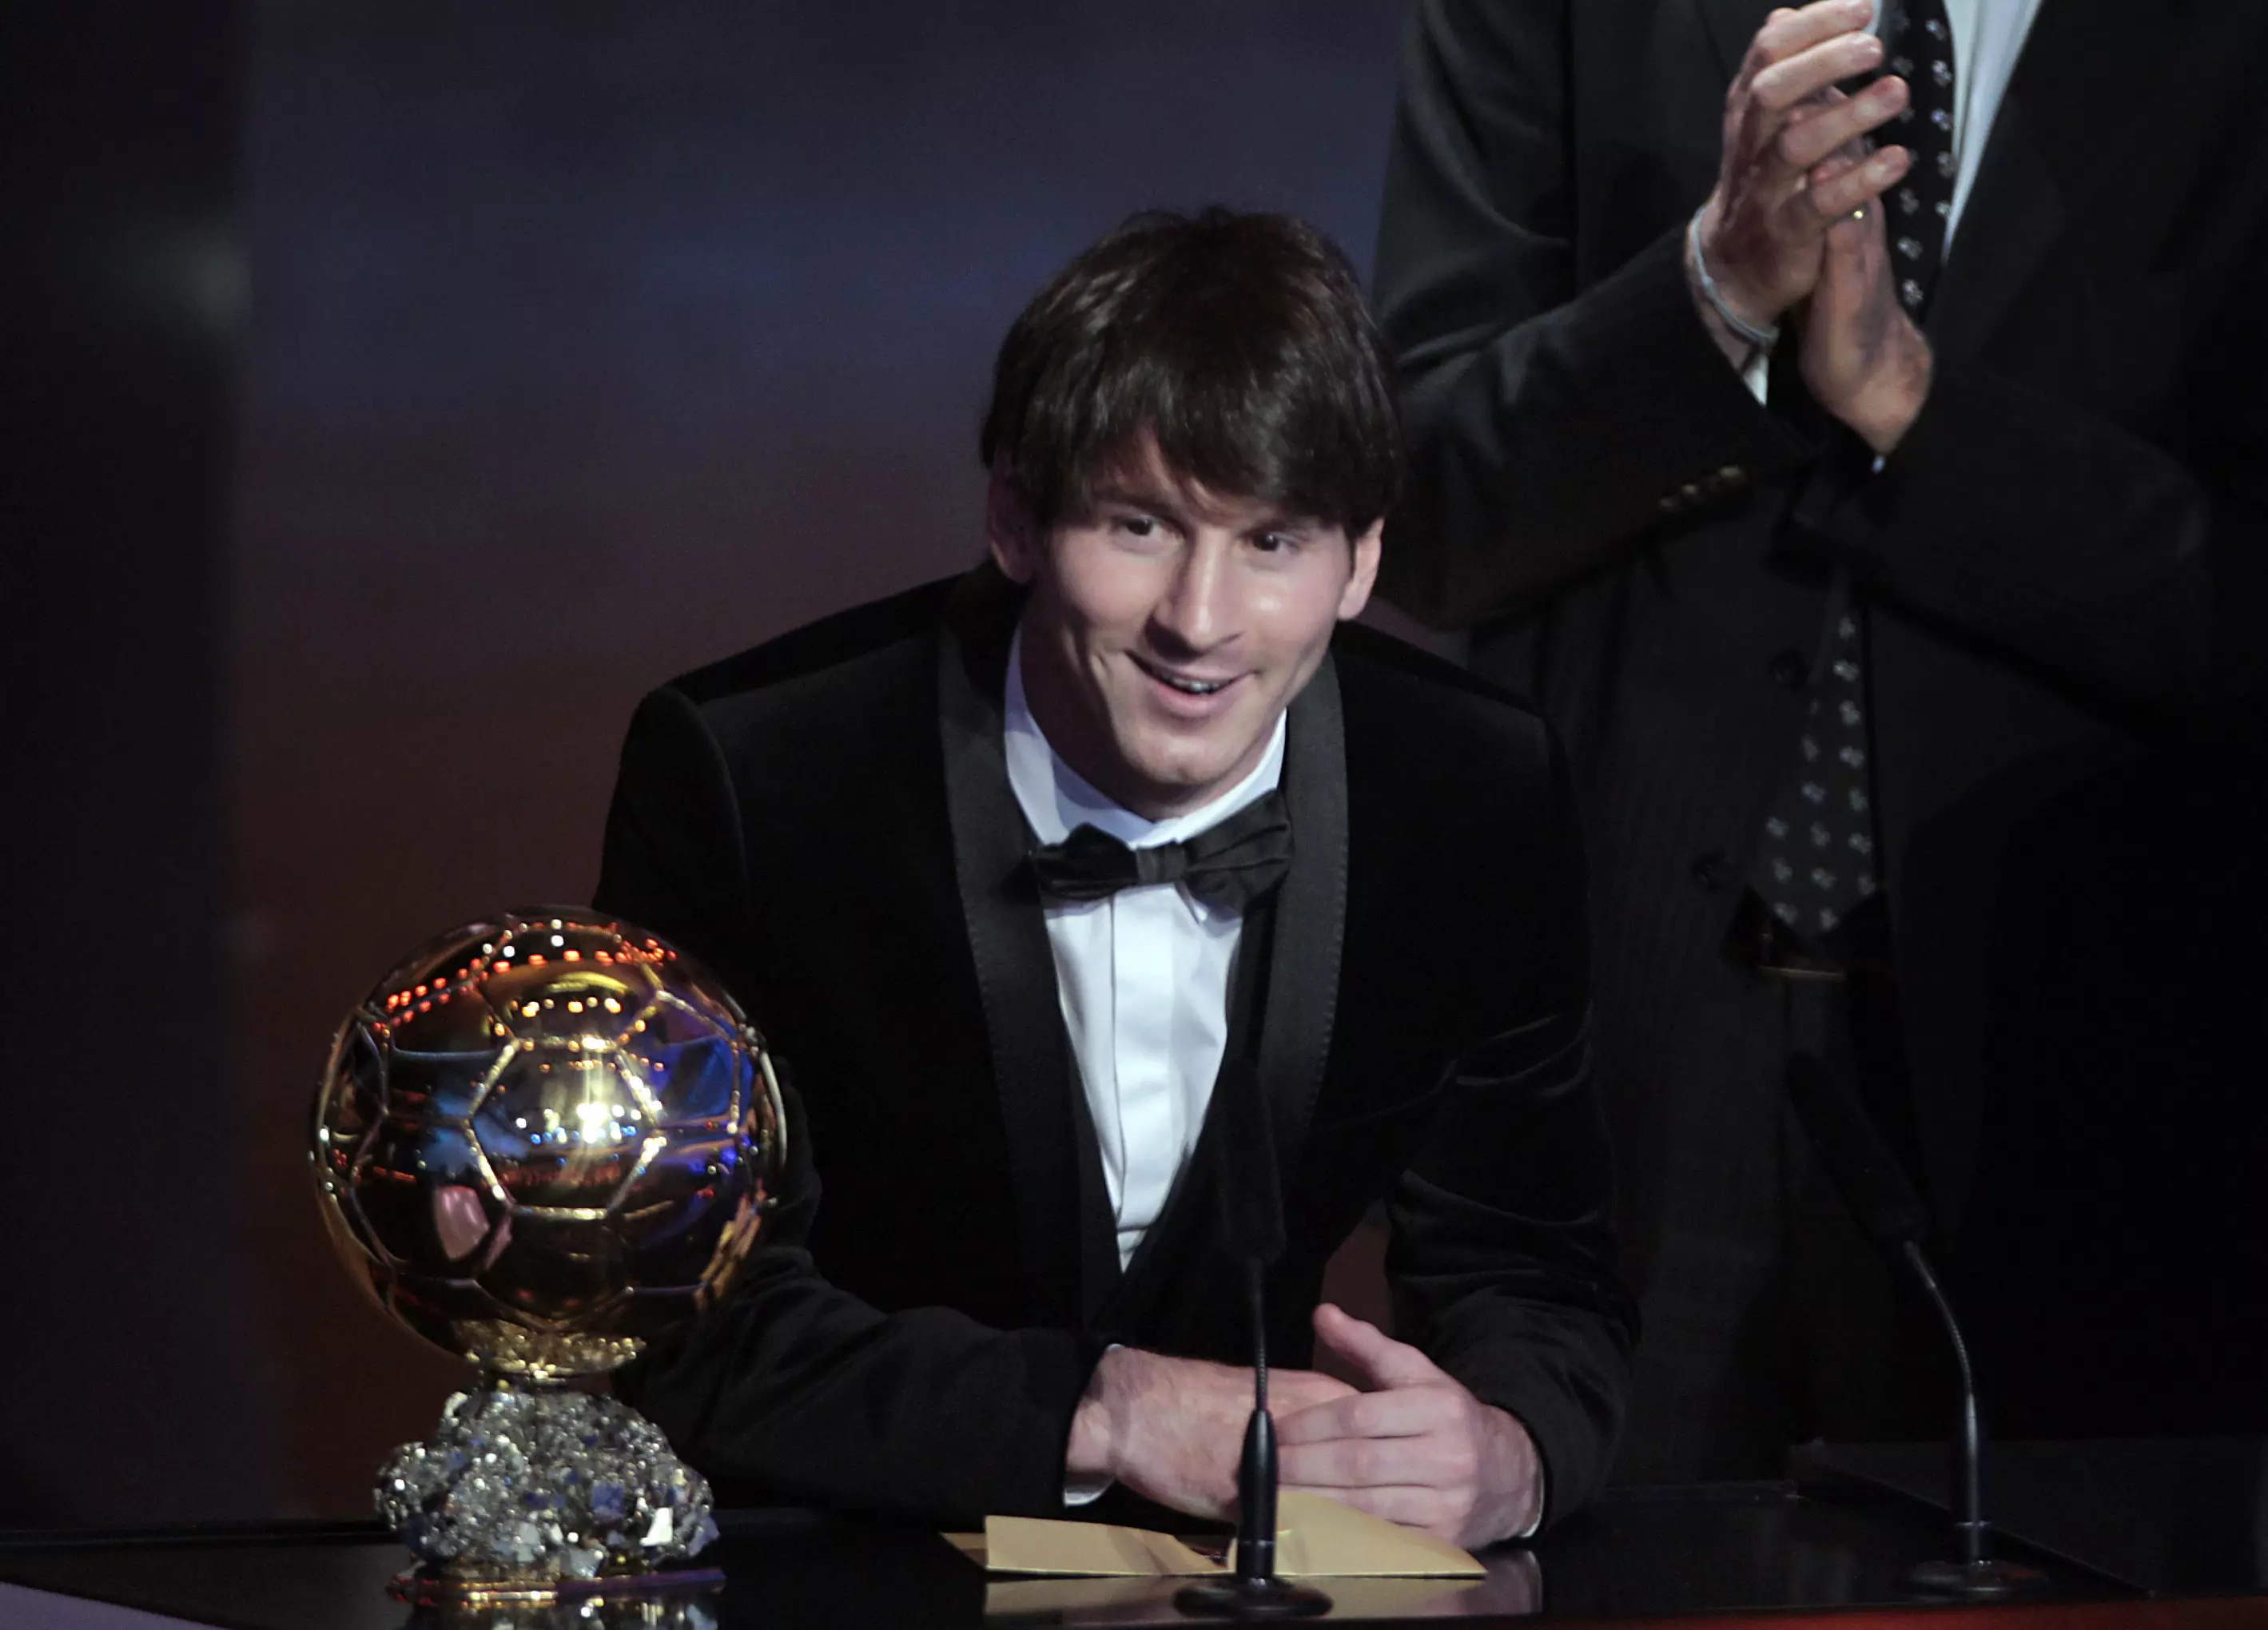 Messi has as many of the awards as Ronaldo. Image: PA Images